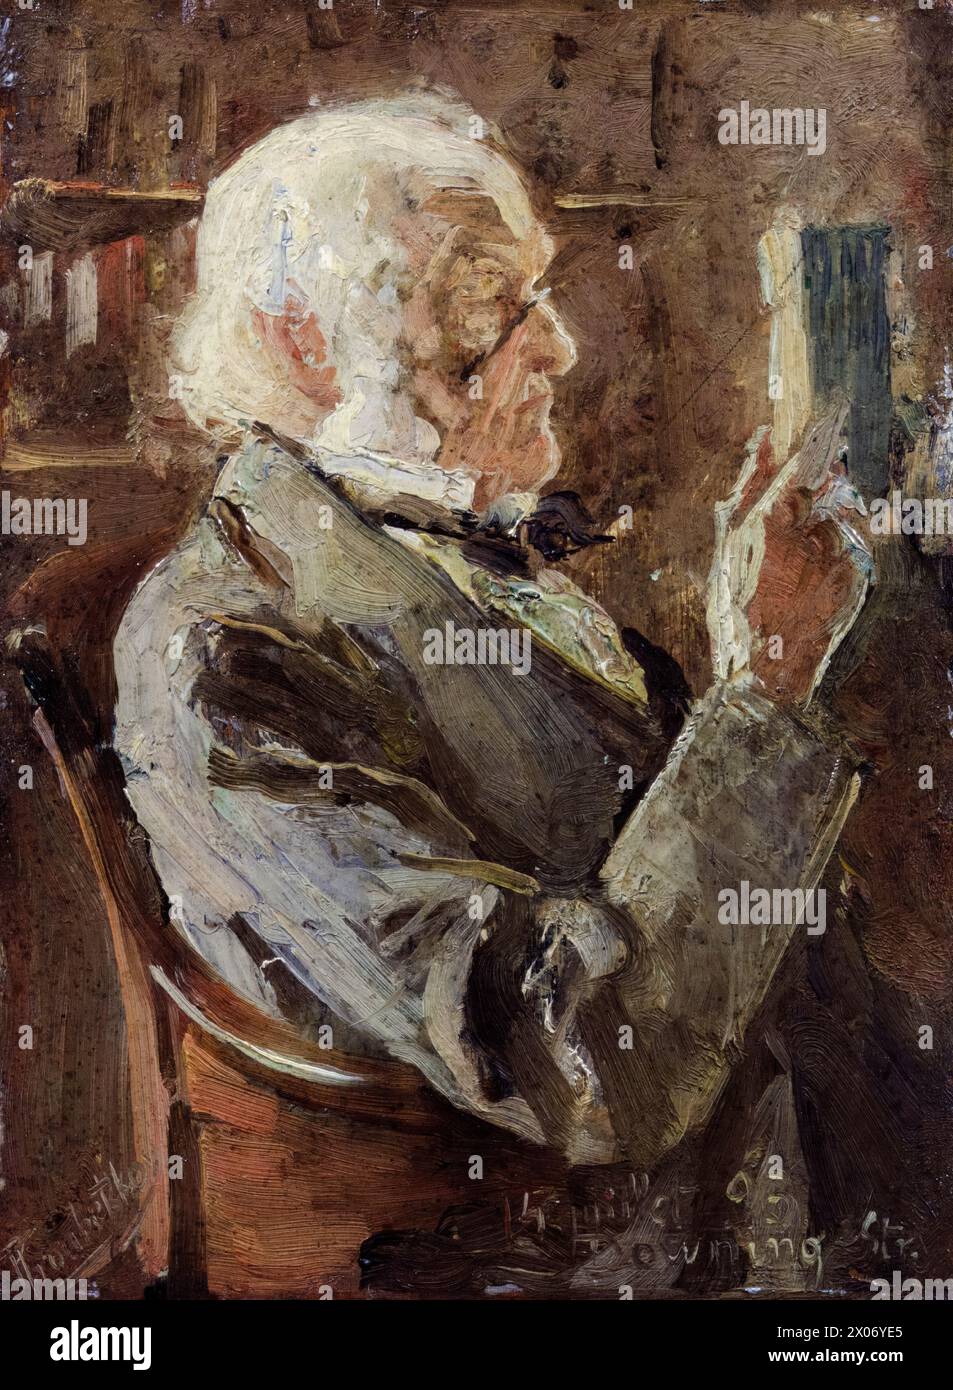 William Gladstone (William Ewart Gladstone, 1809-1898), Liberal politician and four times Prime Minister of the United Kingdom 1868-1874, 1880-1885, Feb-Jul 1886, and 1892-1894, portrait painting in oil on millboard by Pierre Troubetskoy, 1893 Stock Photo